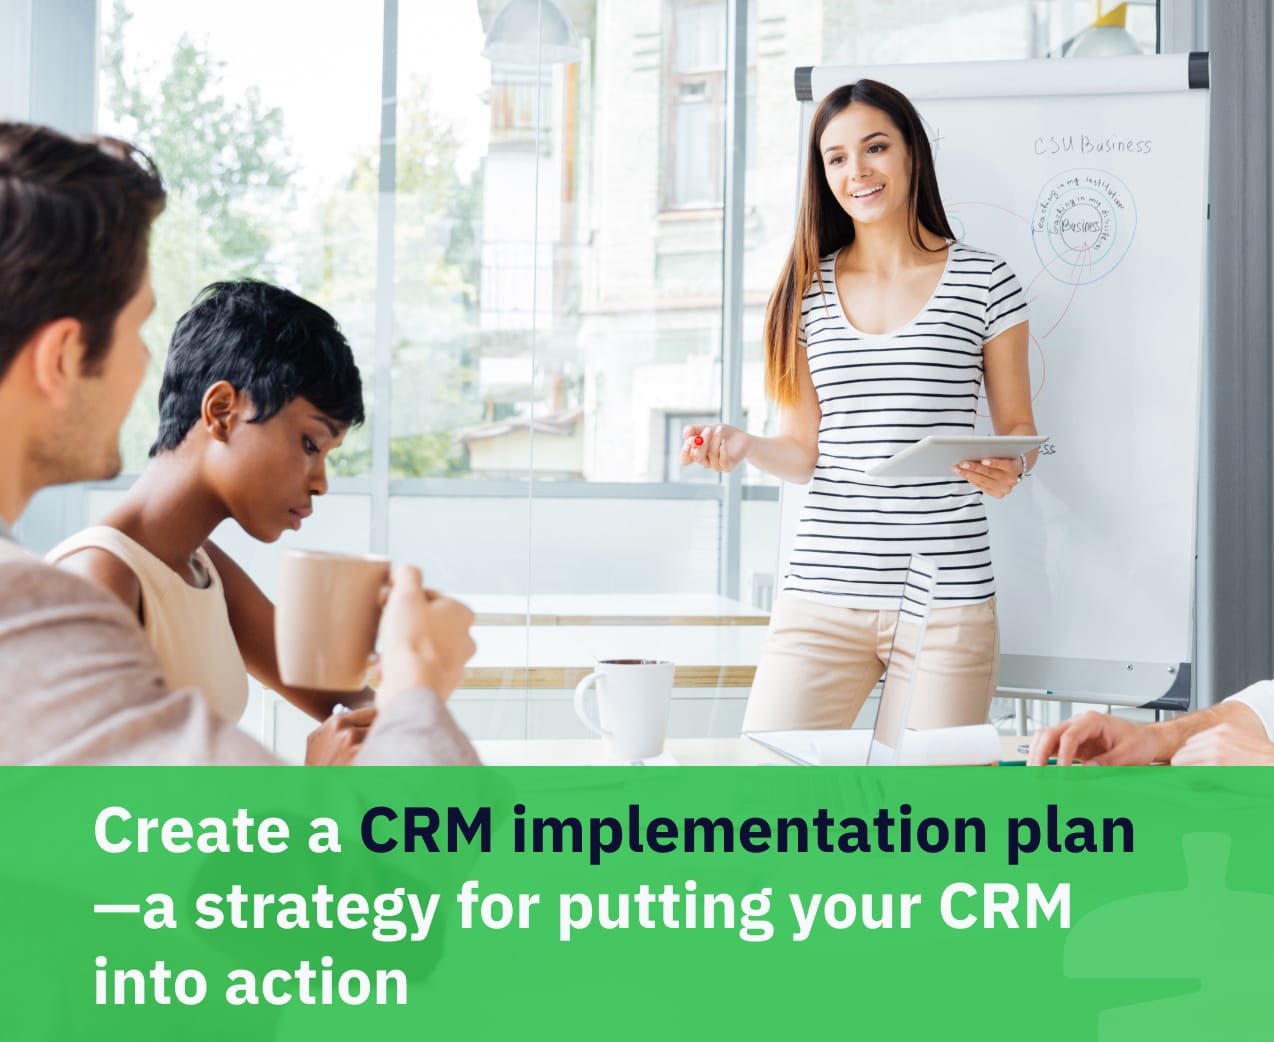 Creating a CRM implementation plan